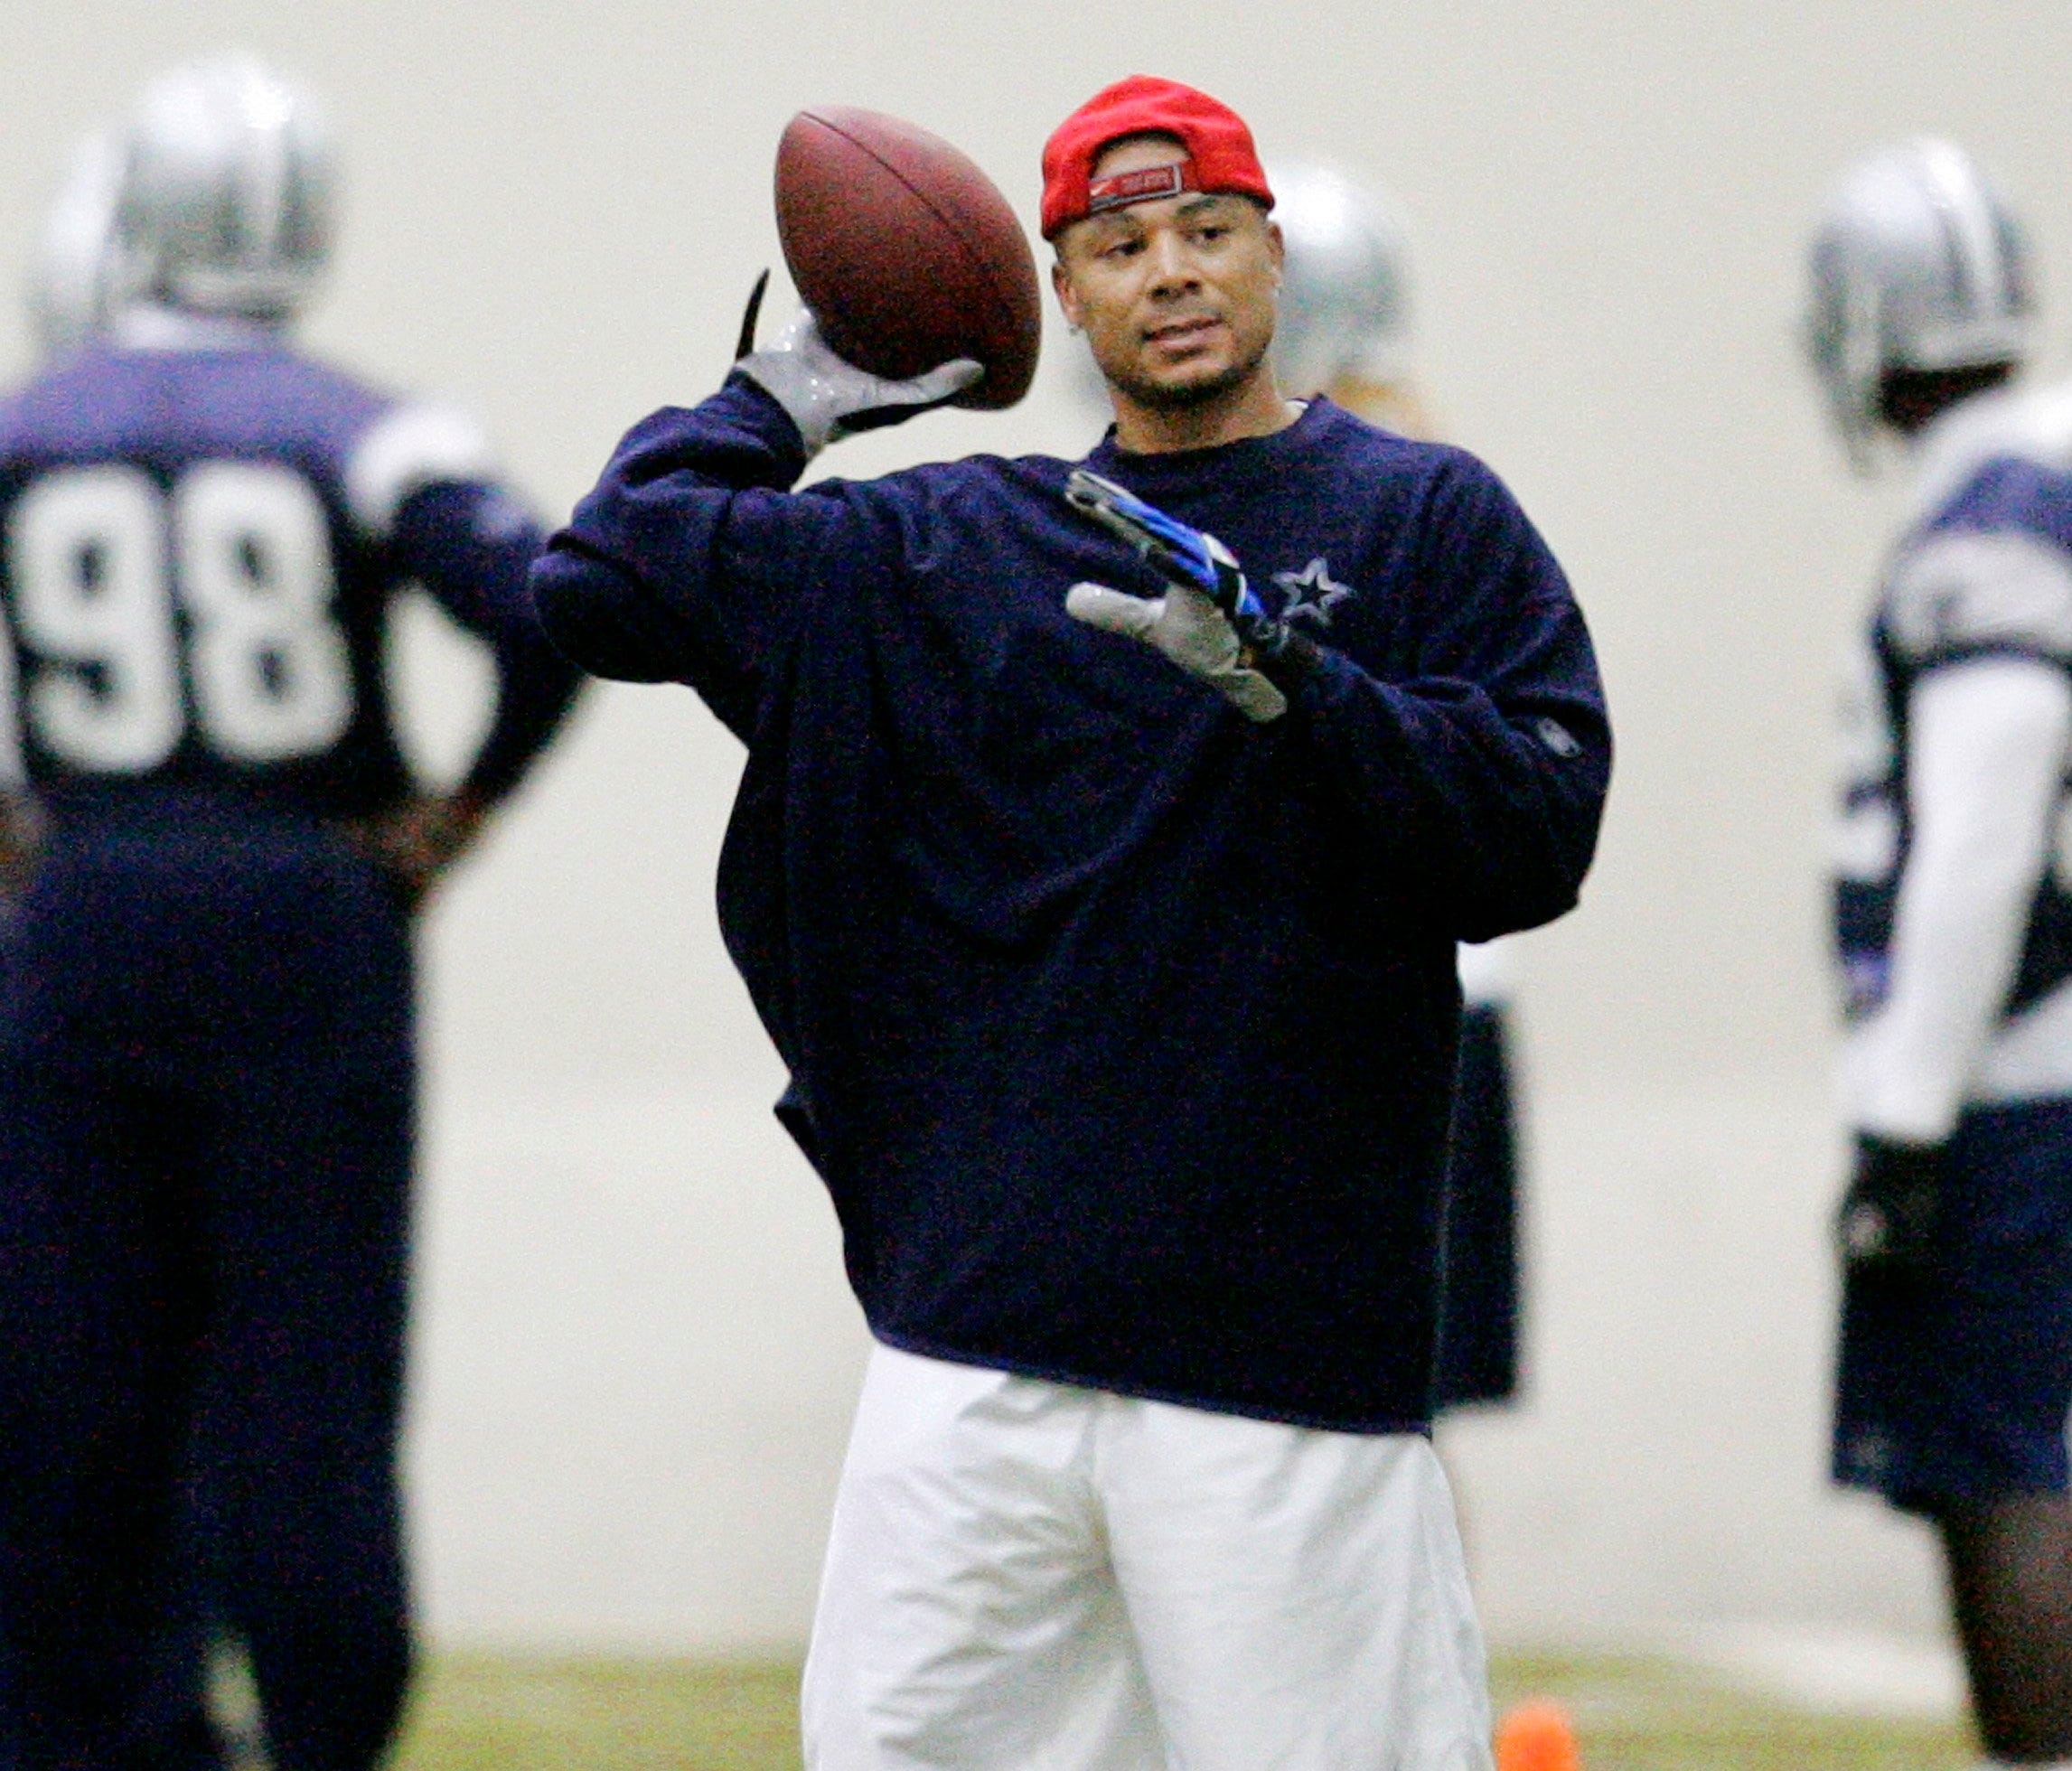 Dallas Cowboys wide receiver Terry Glenn tosses the ball after making a reception during practice at the Cowboys training facility in Irving, Texas, Tuesday, Dec. 12, 2007. Glenn went through some drills at practice for the first time all season Wedn